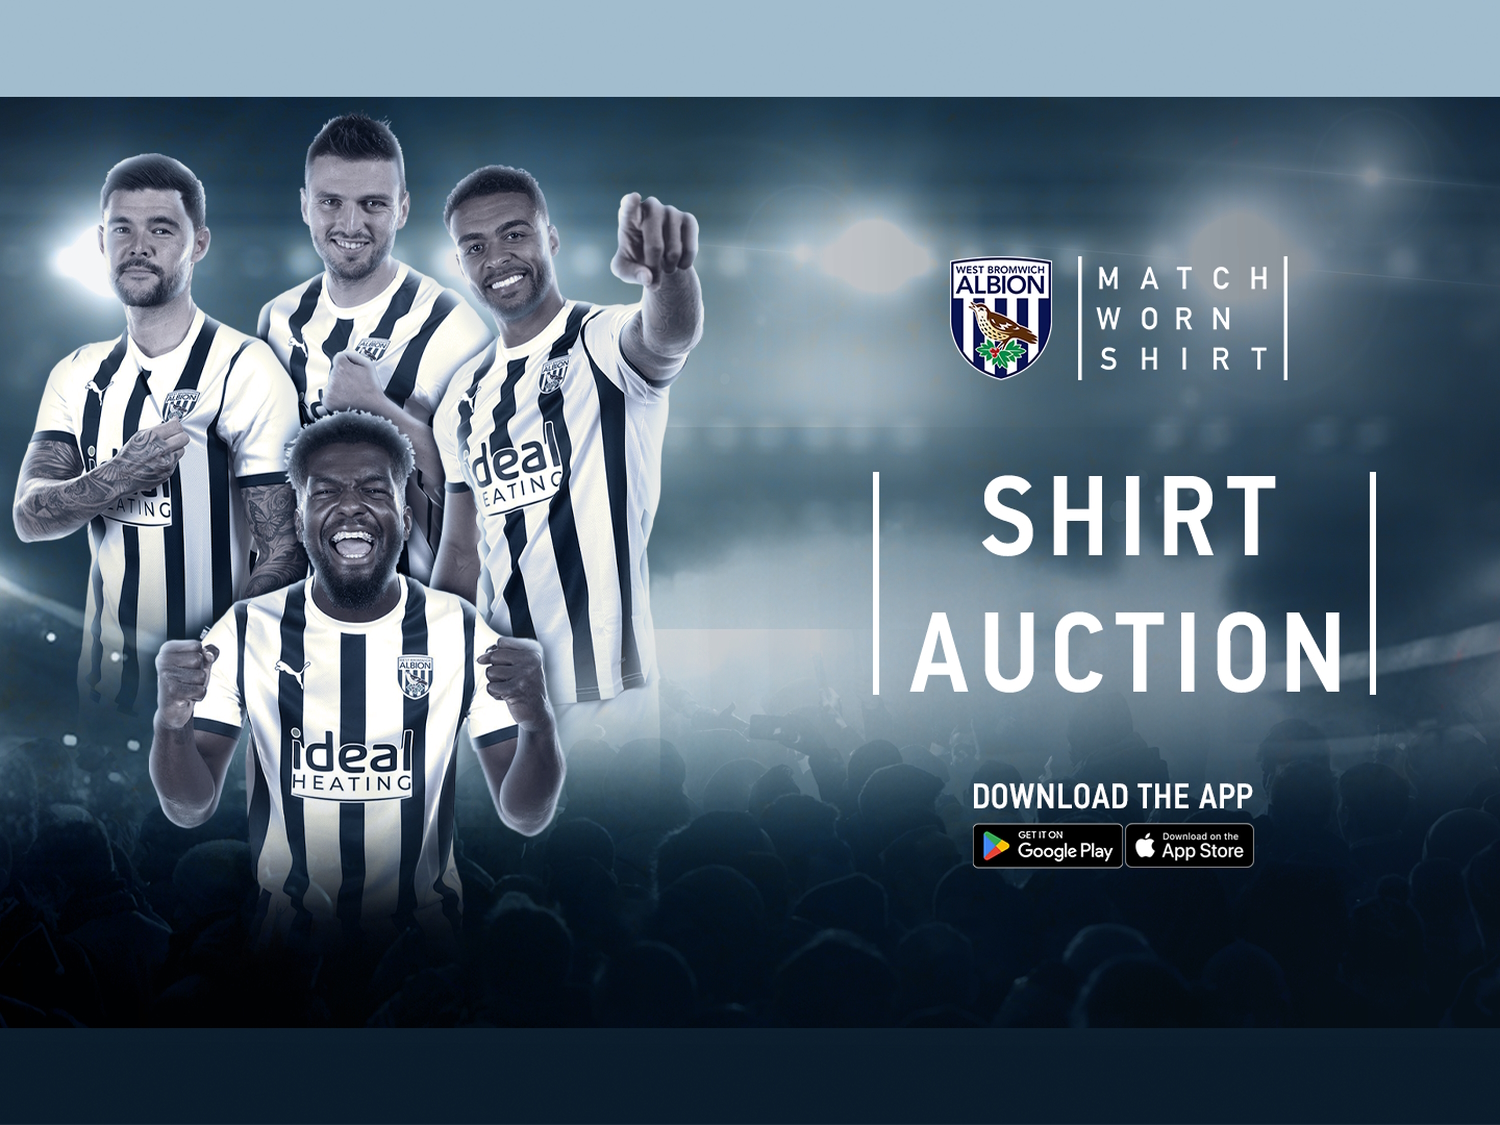 Foundation Day Shirt Auction